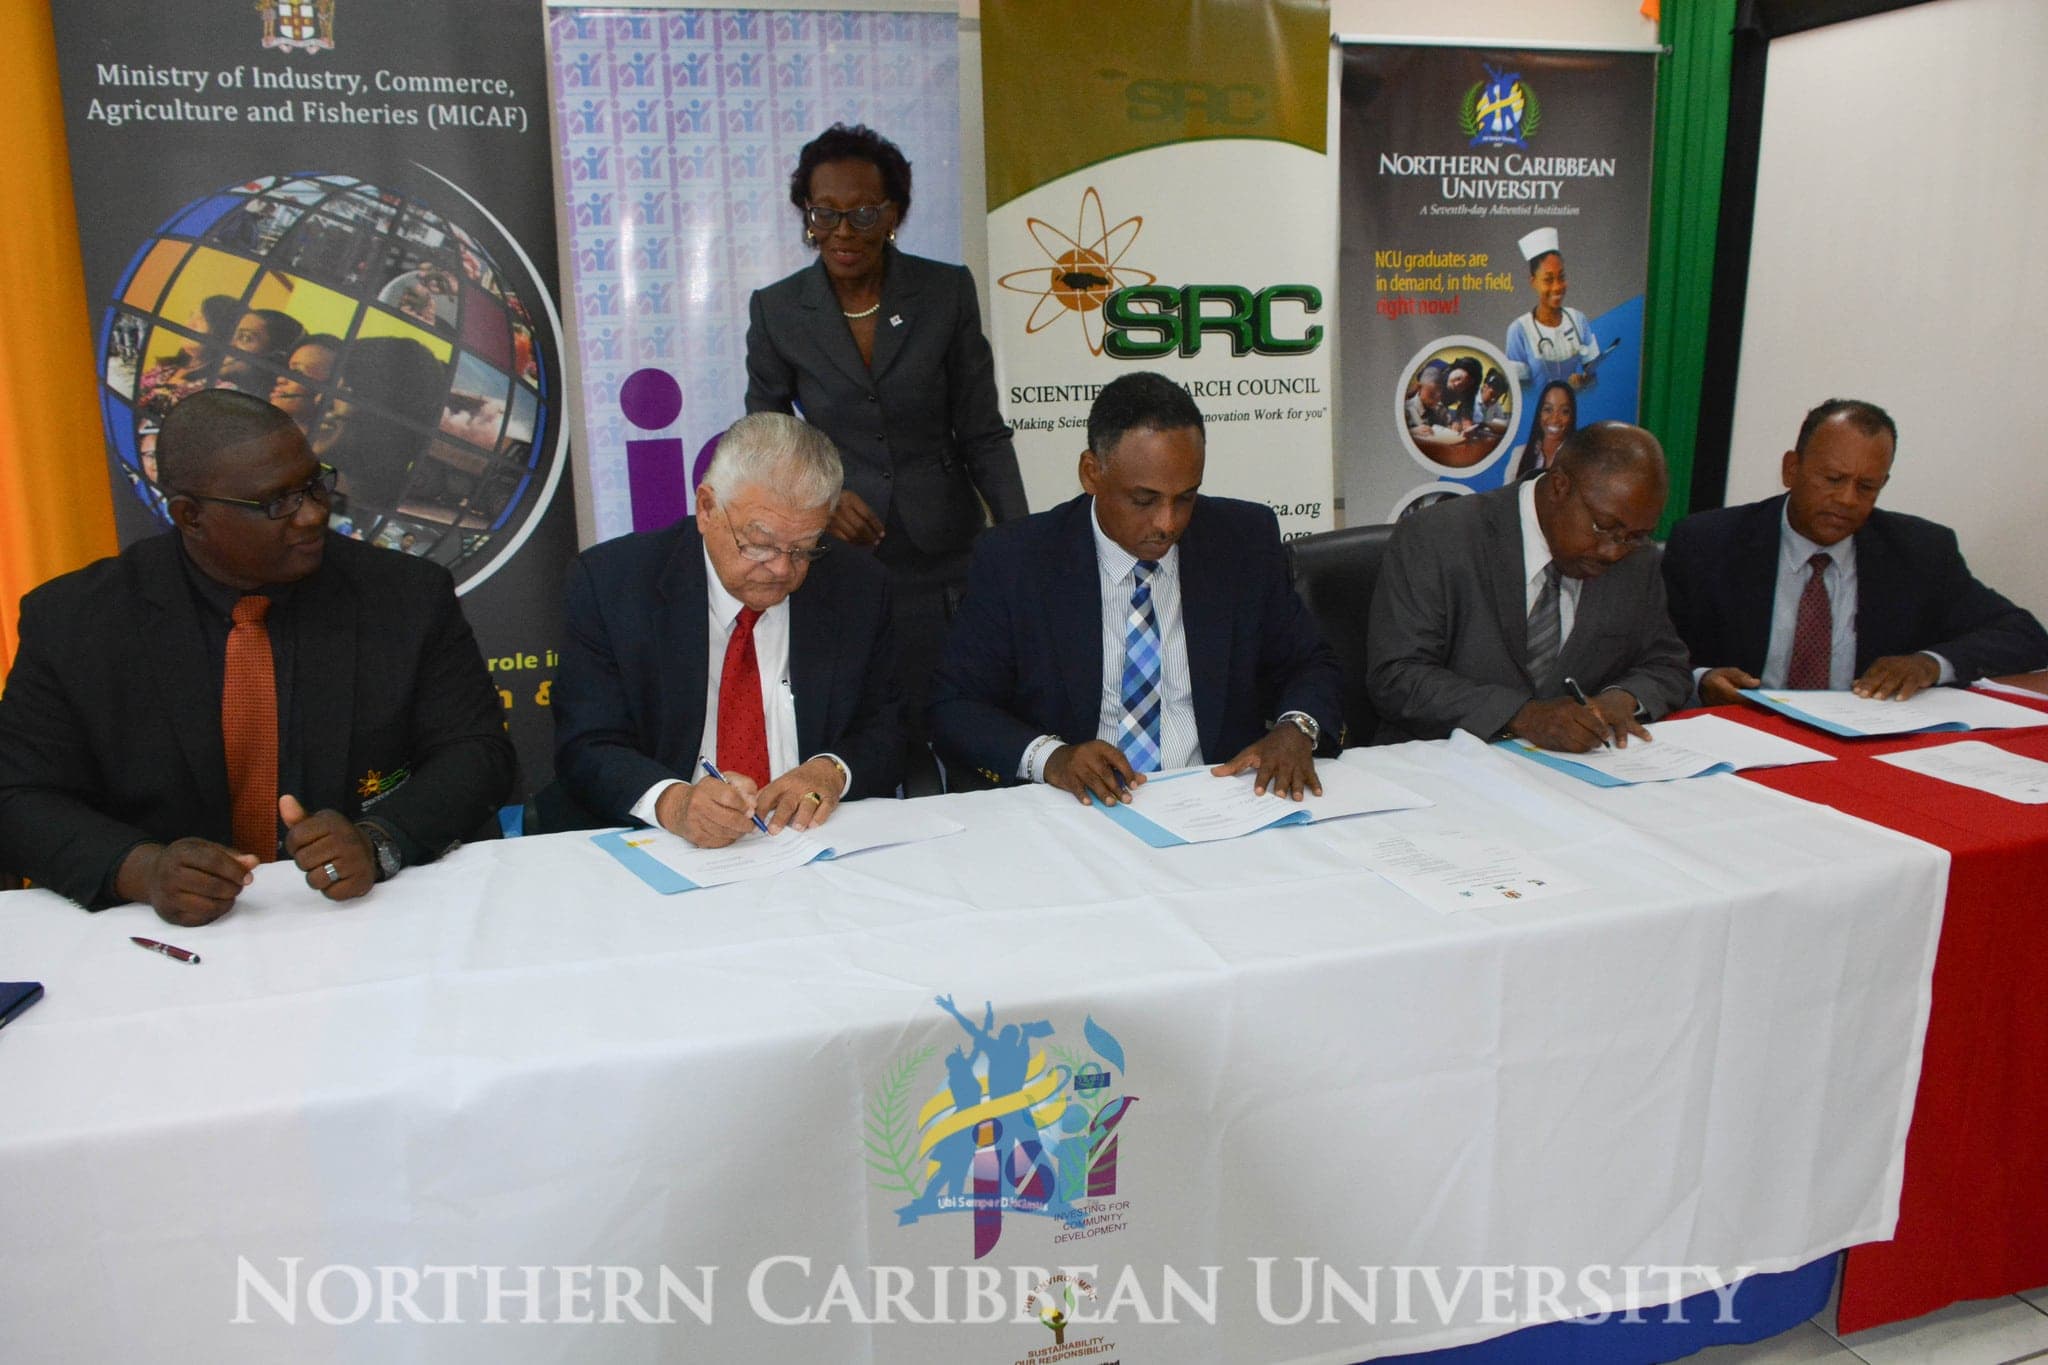 From left to right: Scientific Research Council Executive Director, Dr. Cliff Riley, Minister of Industry, Commerce, Agriculture and Fisheries, Karl Samuda, Jamaica Social Investment Fund Project Officer Dawn Allison (standing) Jamaica Social Investment Fund Managing Director, Omar Sweeney, Northern Caribbean University Provost Dr. Paul Gyles, and Dean of the College of Natural and Applied Sciences at NCU, Dr Vincent Wright signing the in-vitro propagation of Irish potato seed program in Kingston, Jamaica. Image courtesy of NCU